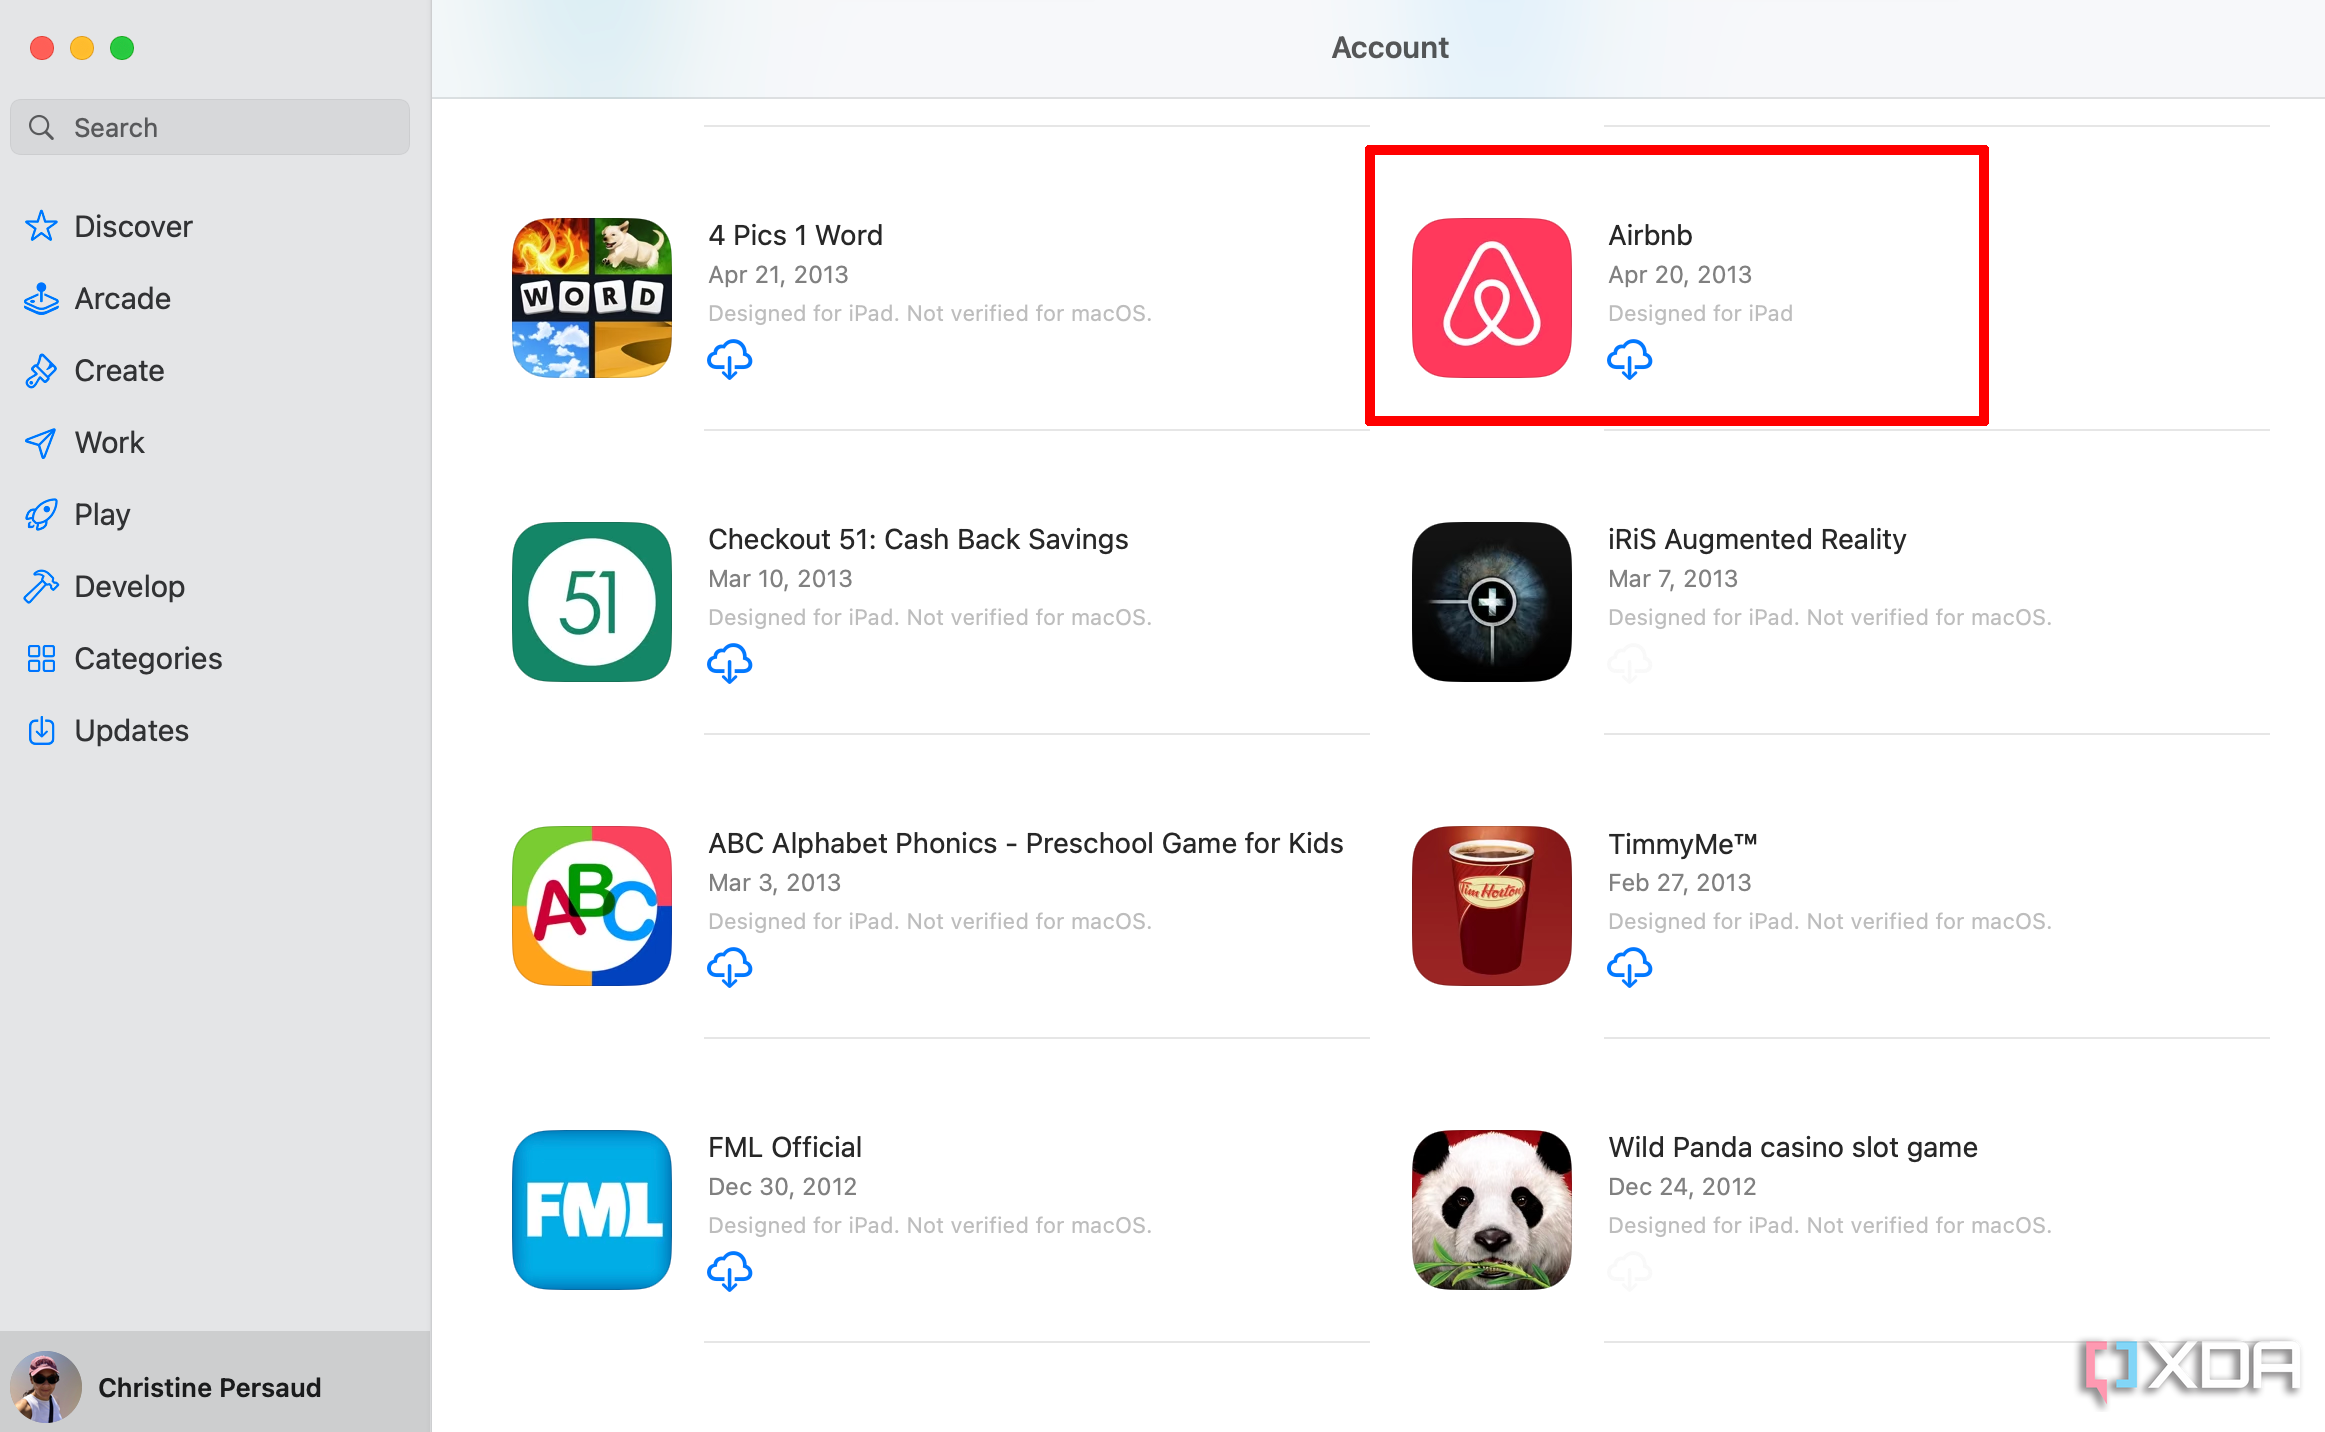 App Store app on Mac with the Airbnb app selected and the cloud icon shown for download.